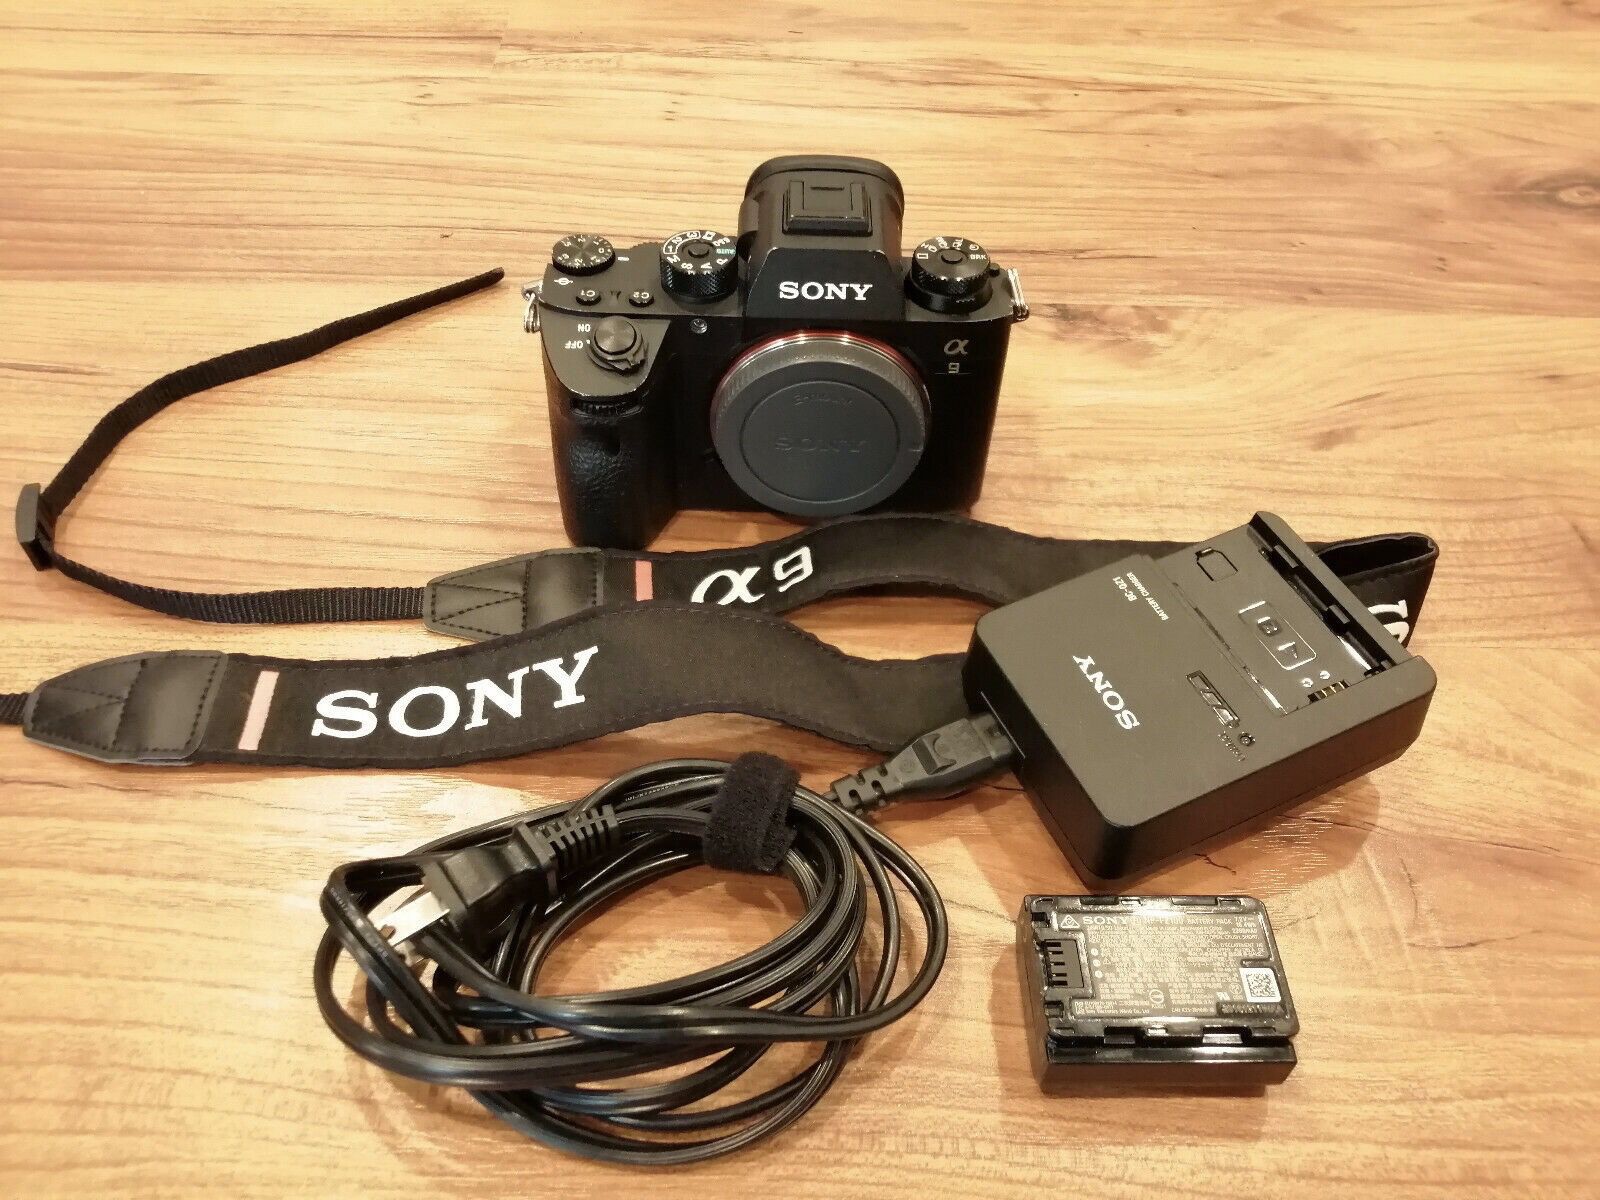 Sony Alpha a9 Mirrorless Digital Camera Body - Only 9765 Shutter Counts